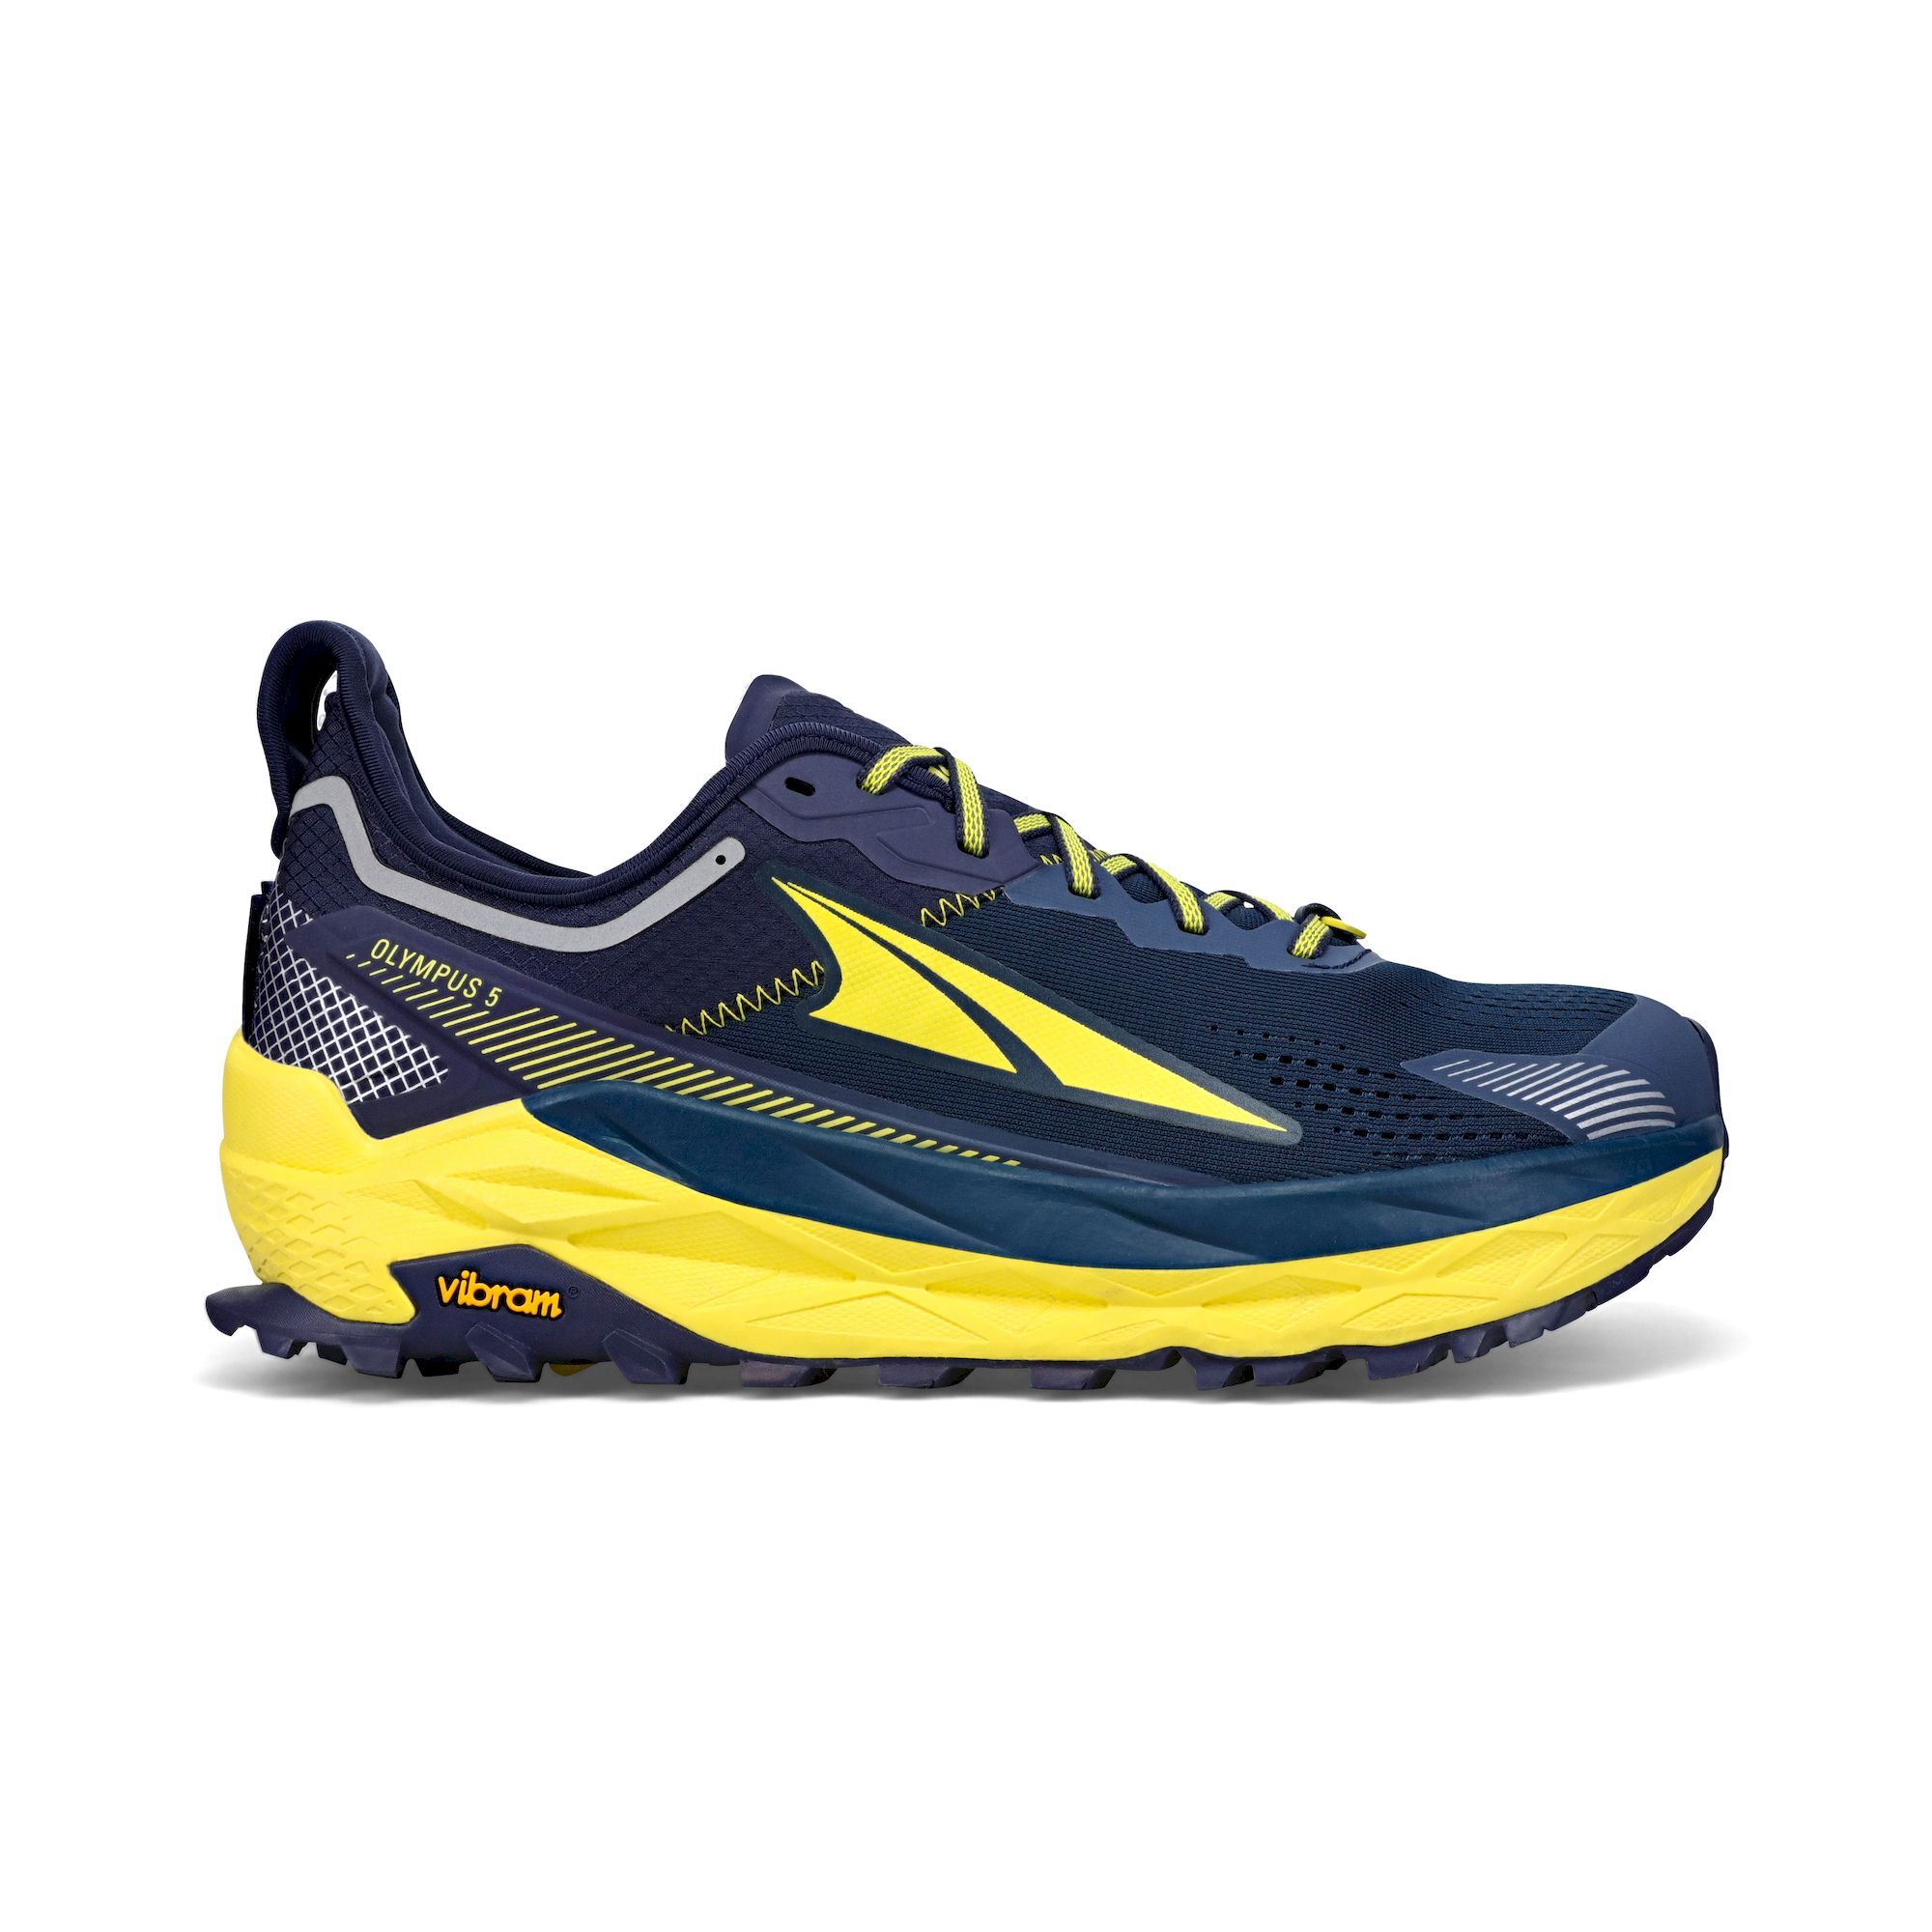 Altra Olympus 5 - Trail running shoes - Men's